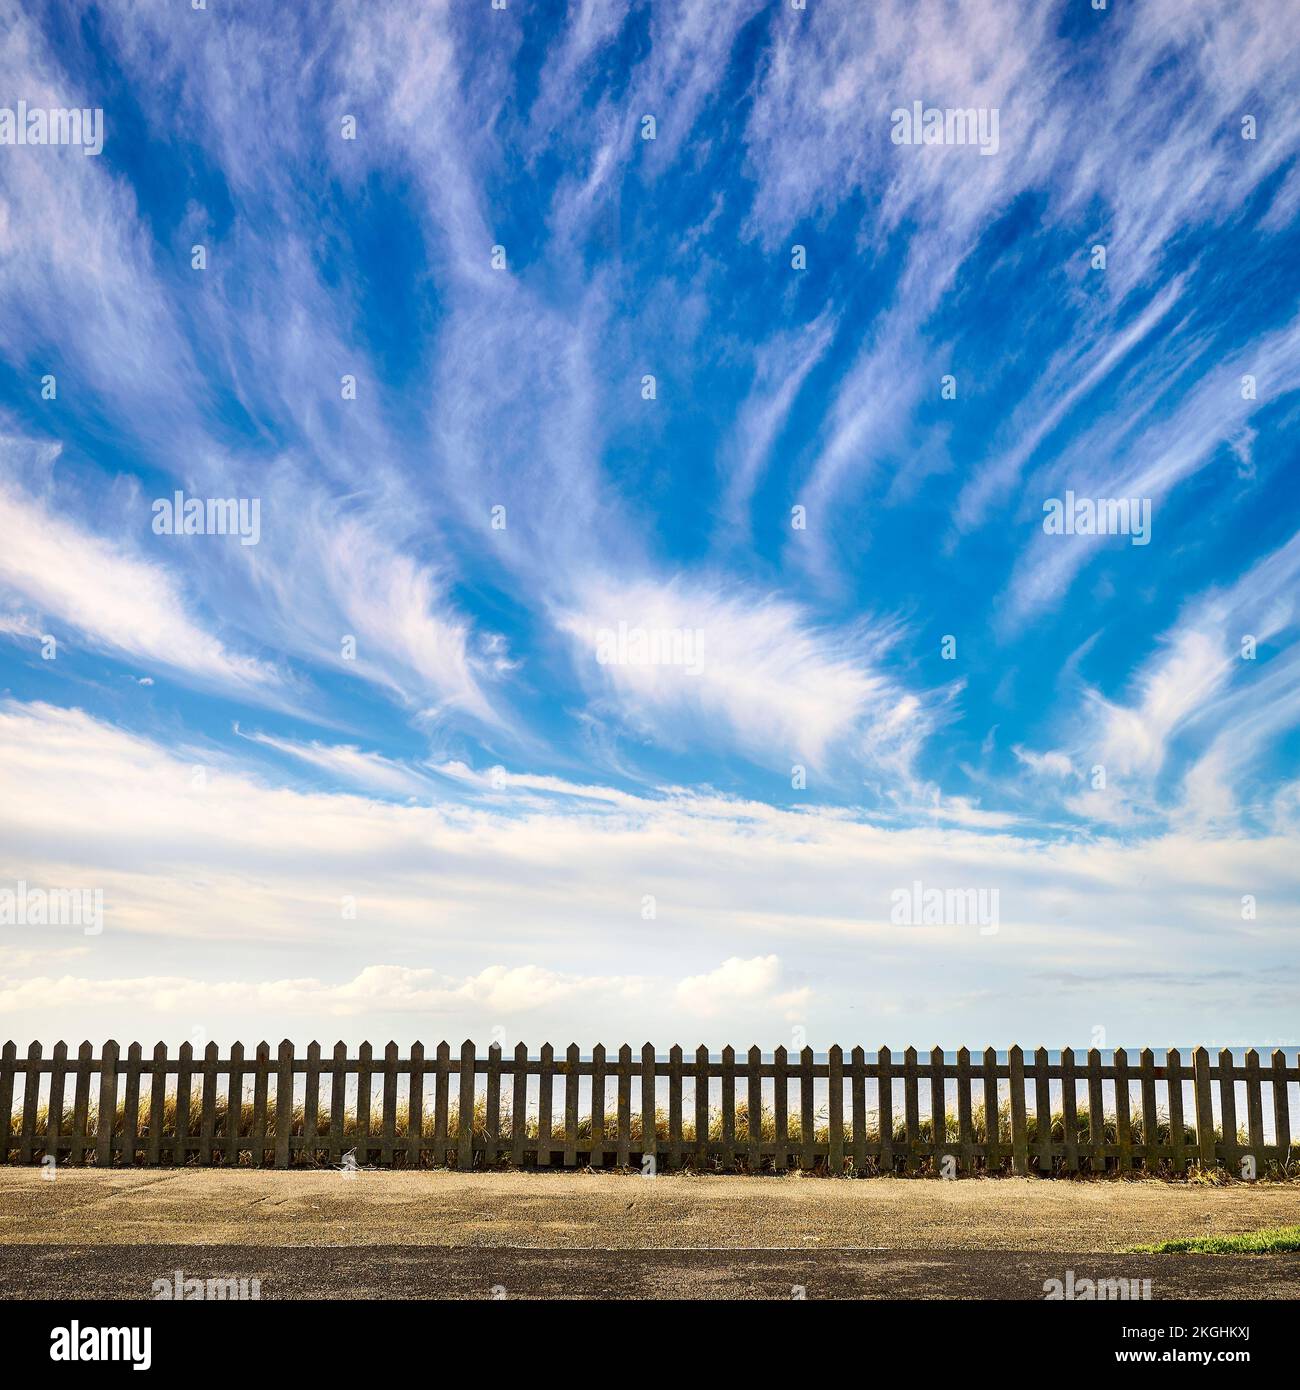 Regular concrete fence against blue sky and wispy cirrus clouds Stock Photo